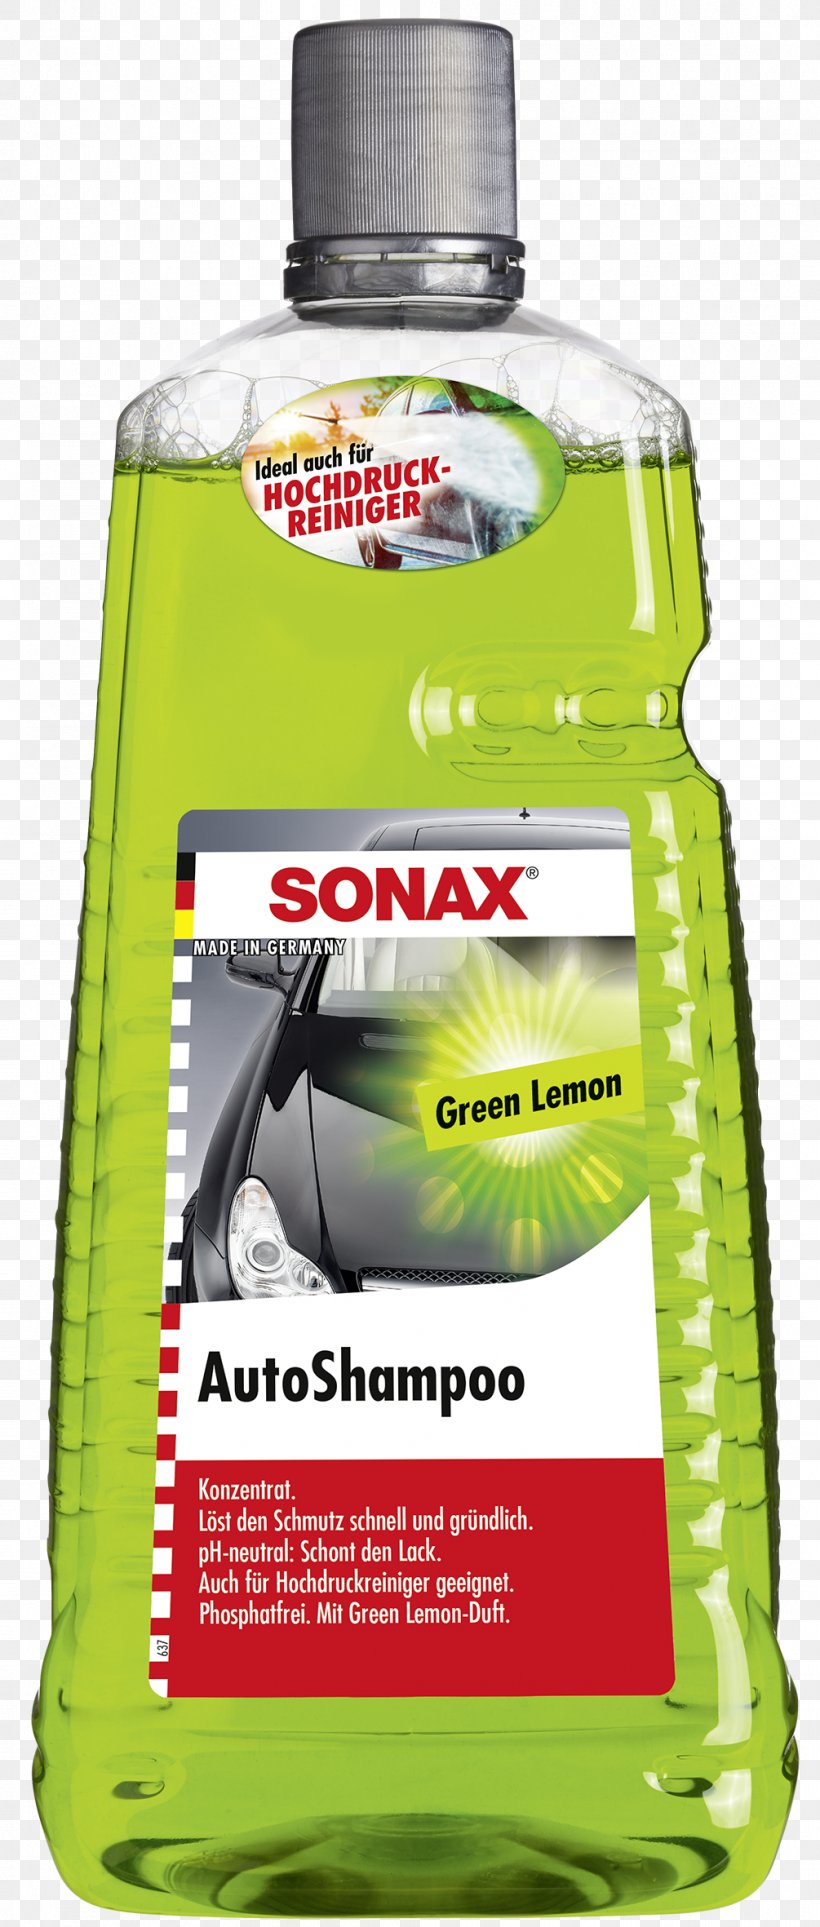 Car Sonax Lemon Concentrate Shampoo, PNG, 1005x2362px, Car, Car Wash, Concentrate, Dirt, Lacquer Download Free